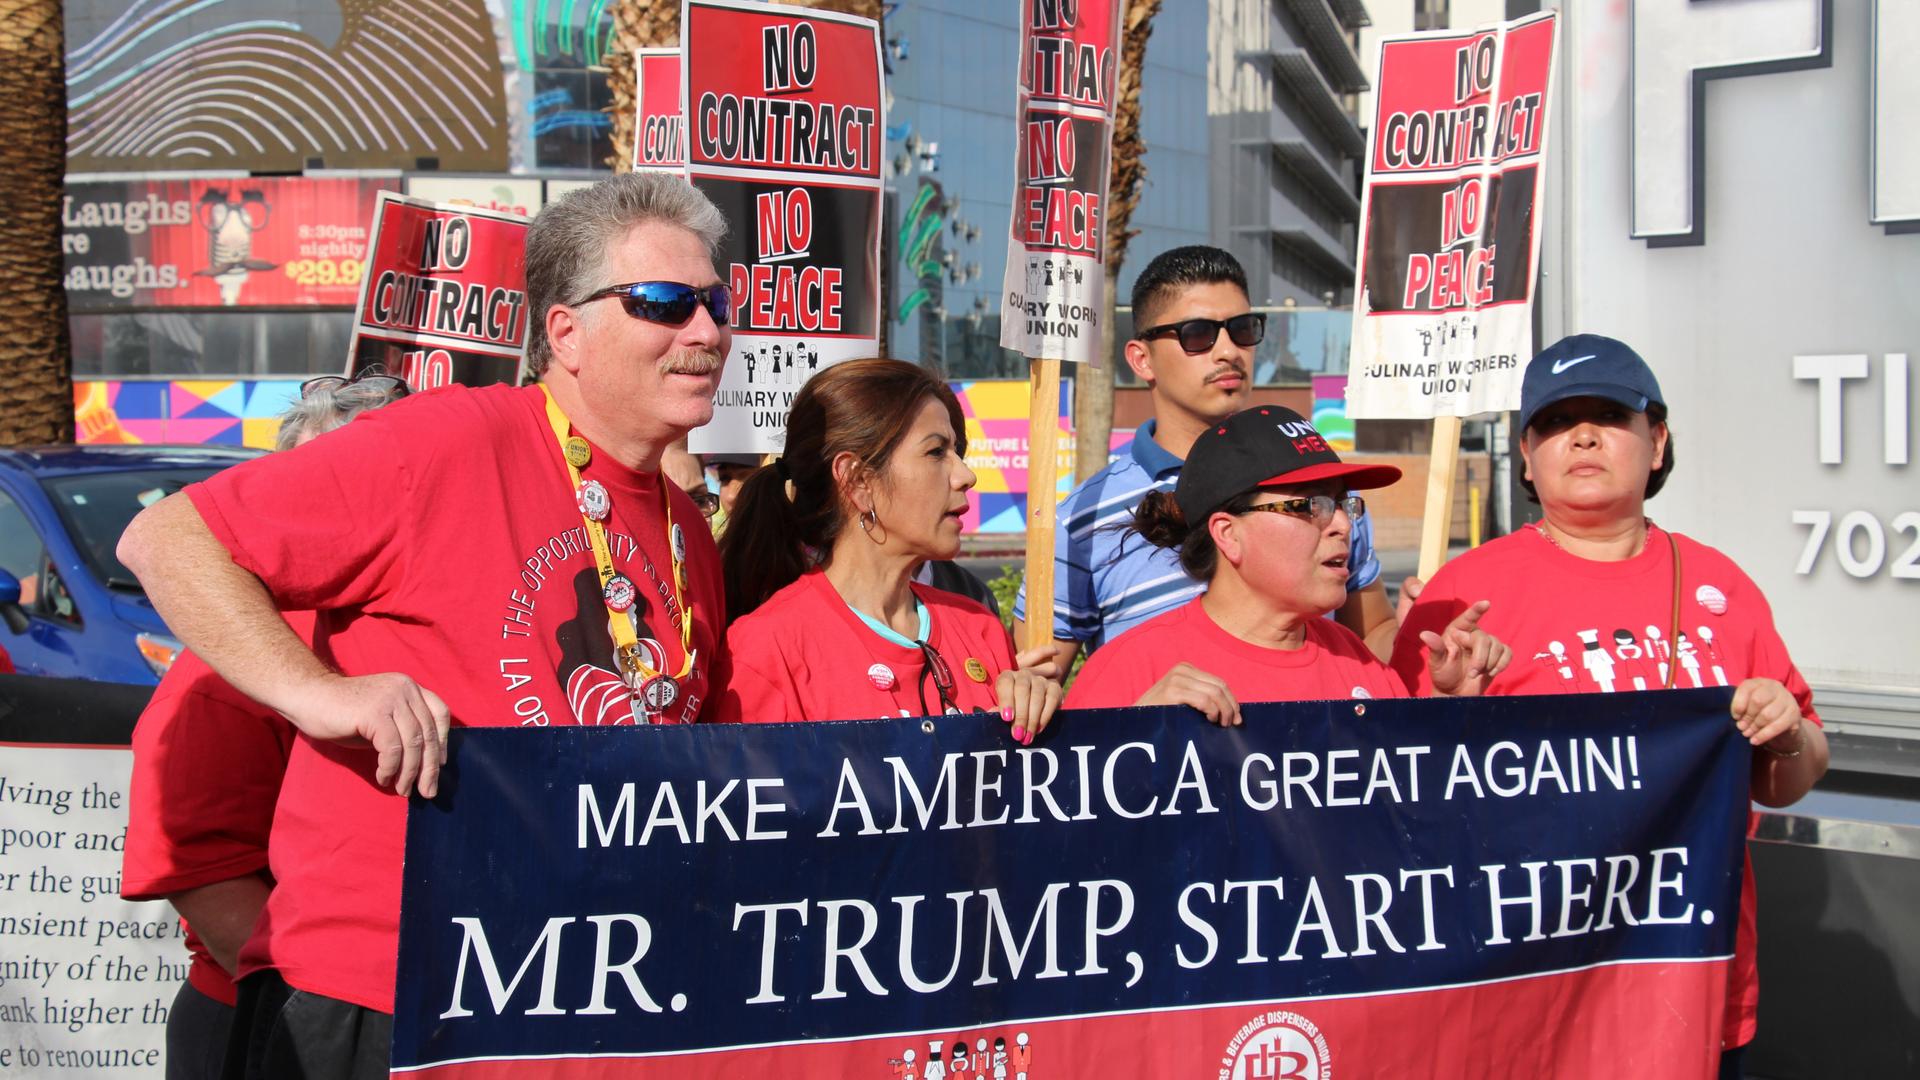 Hundreds protest on the Las Vegas Strip and in front of the Trump International Hotel. Workers are demanding a union contract at the Las Vegas hotel. April 21, 2016.